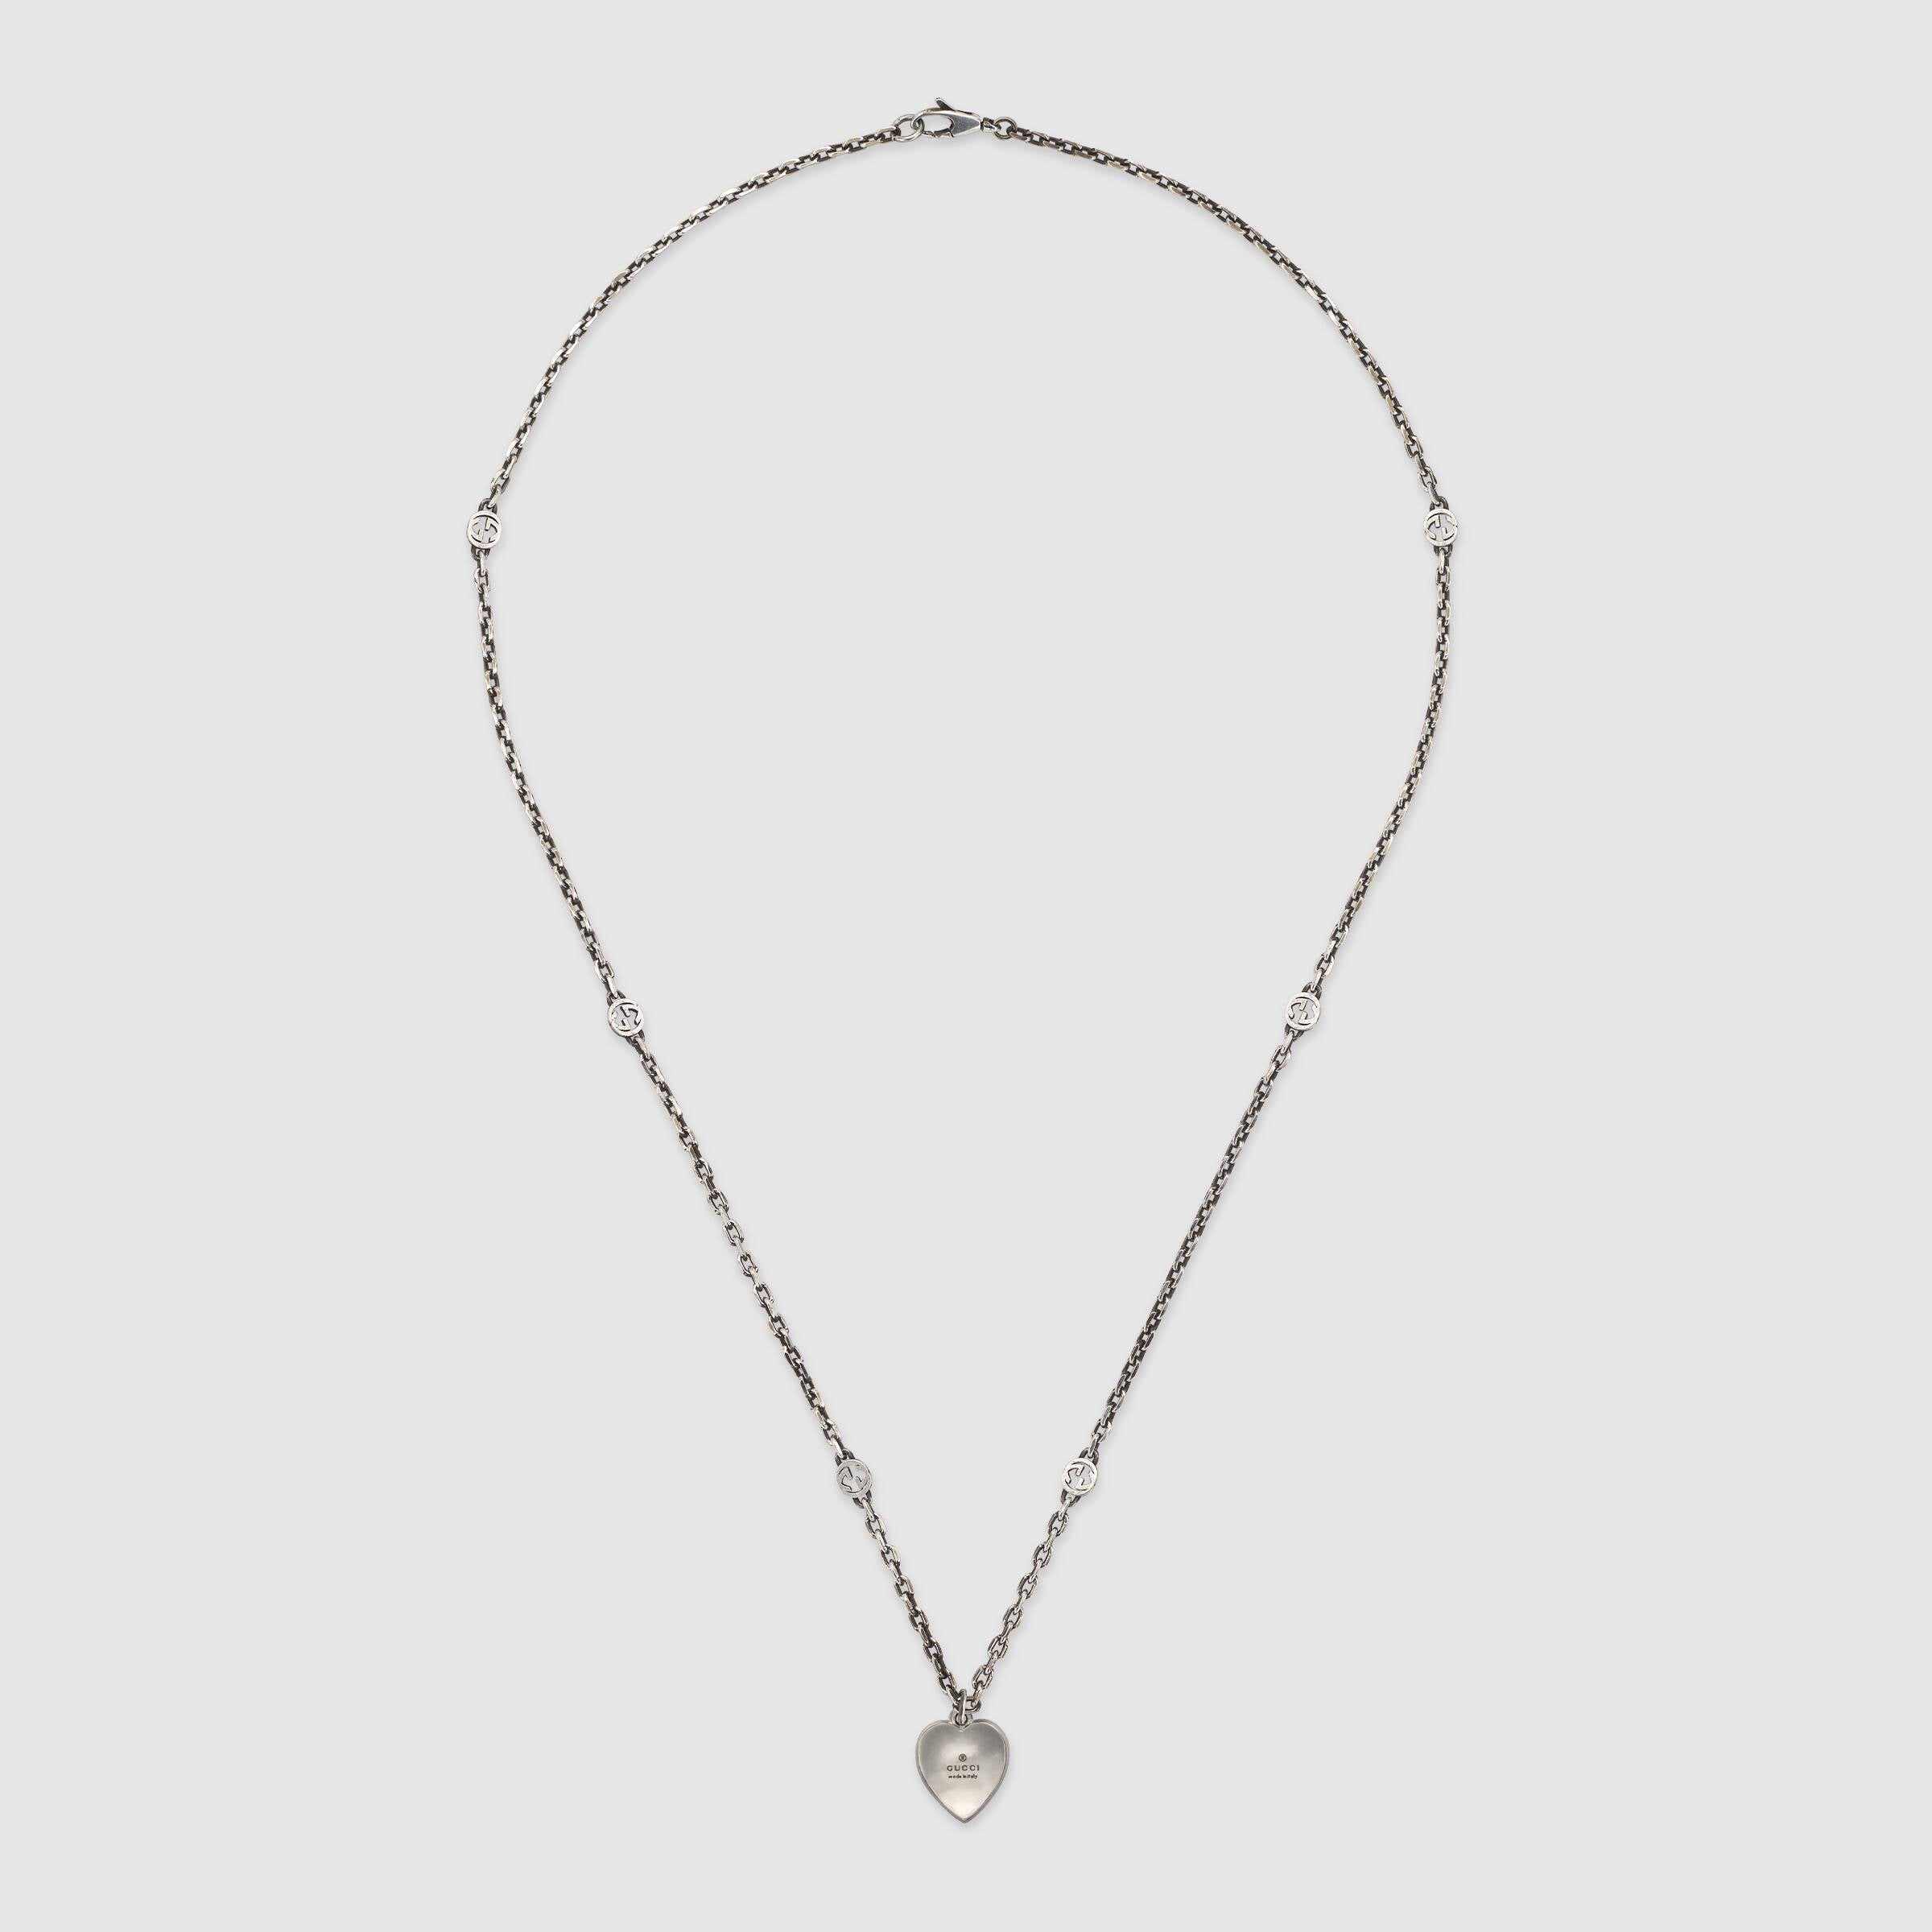 Gucci Heart Silver Necklace with Interlocking G